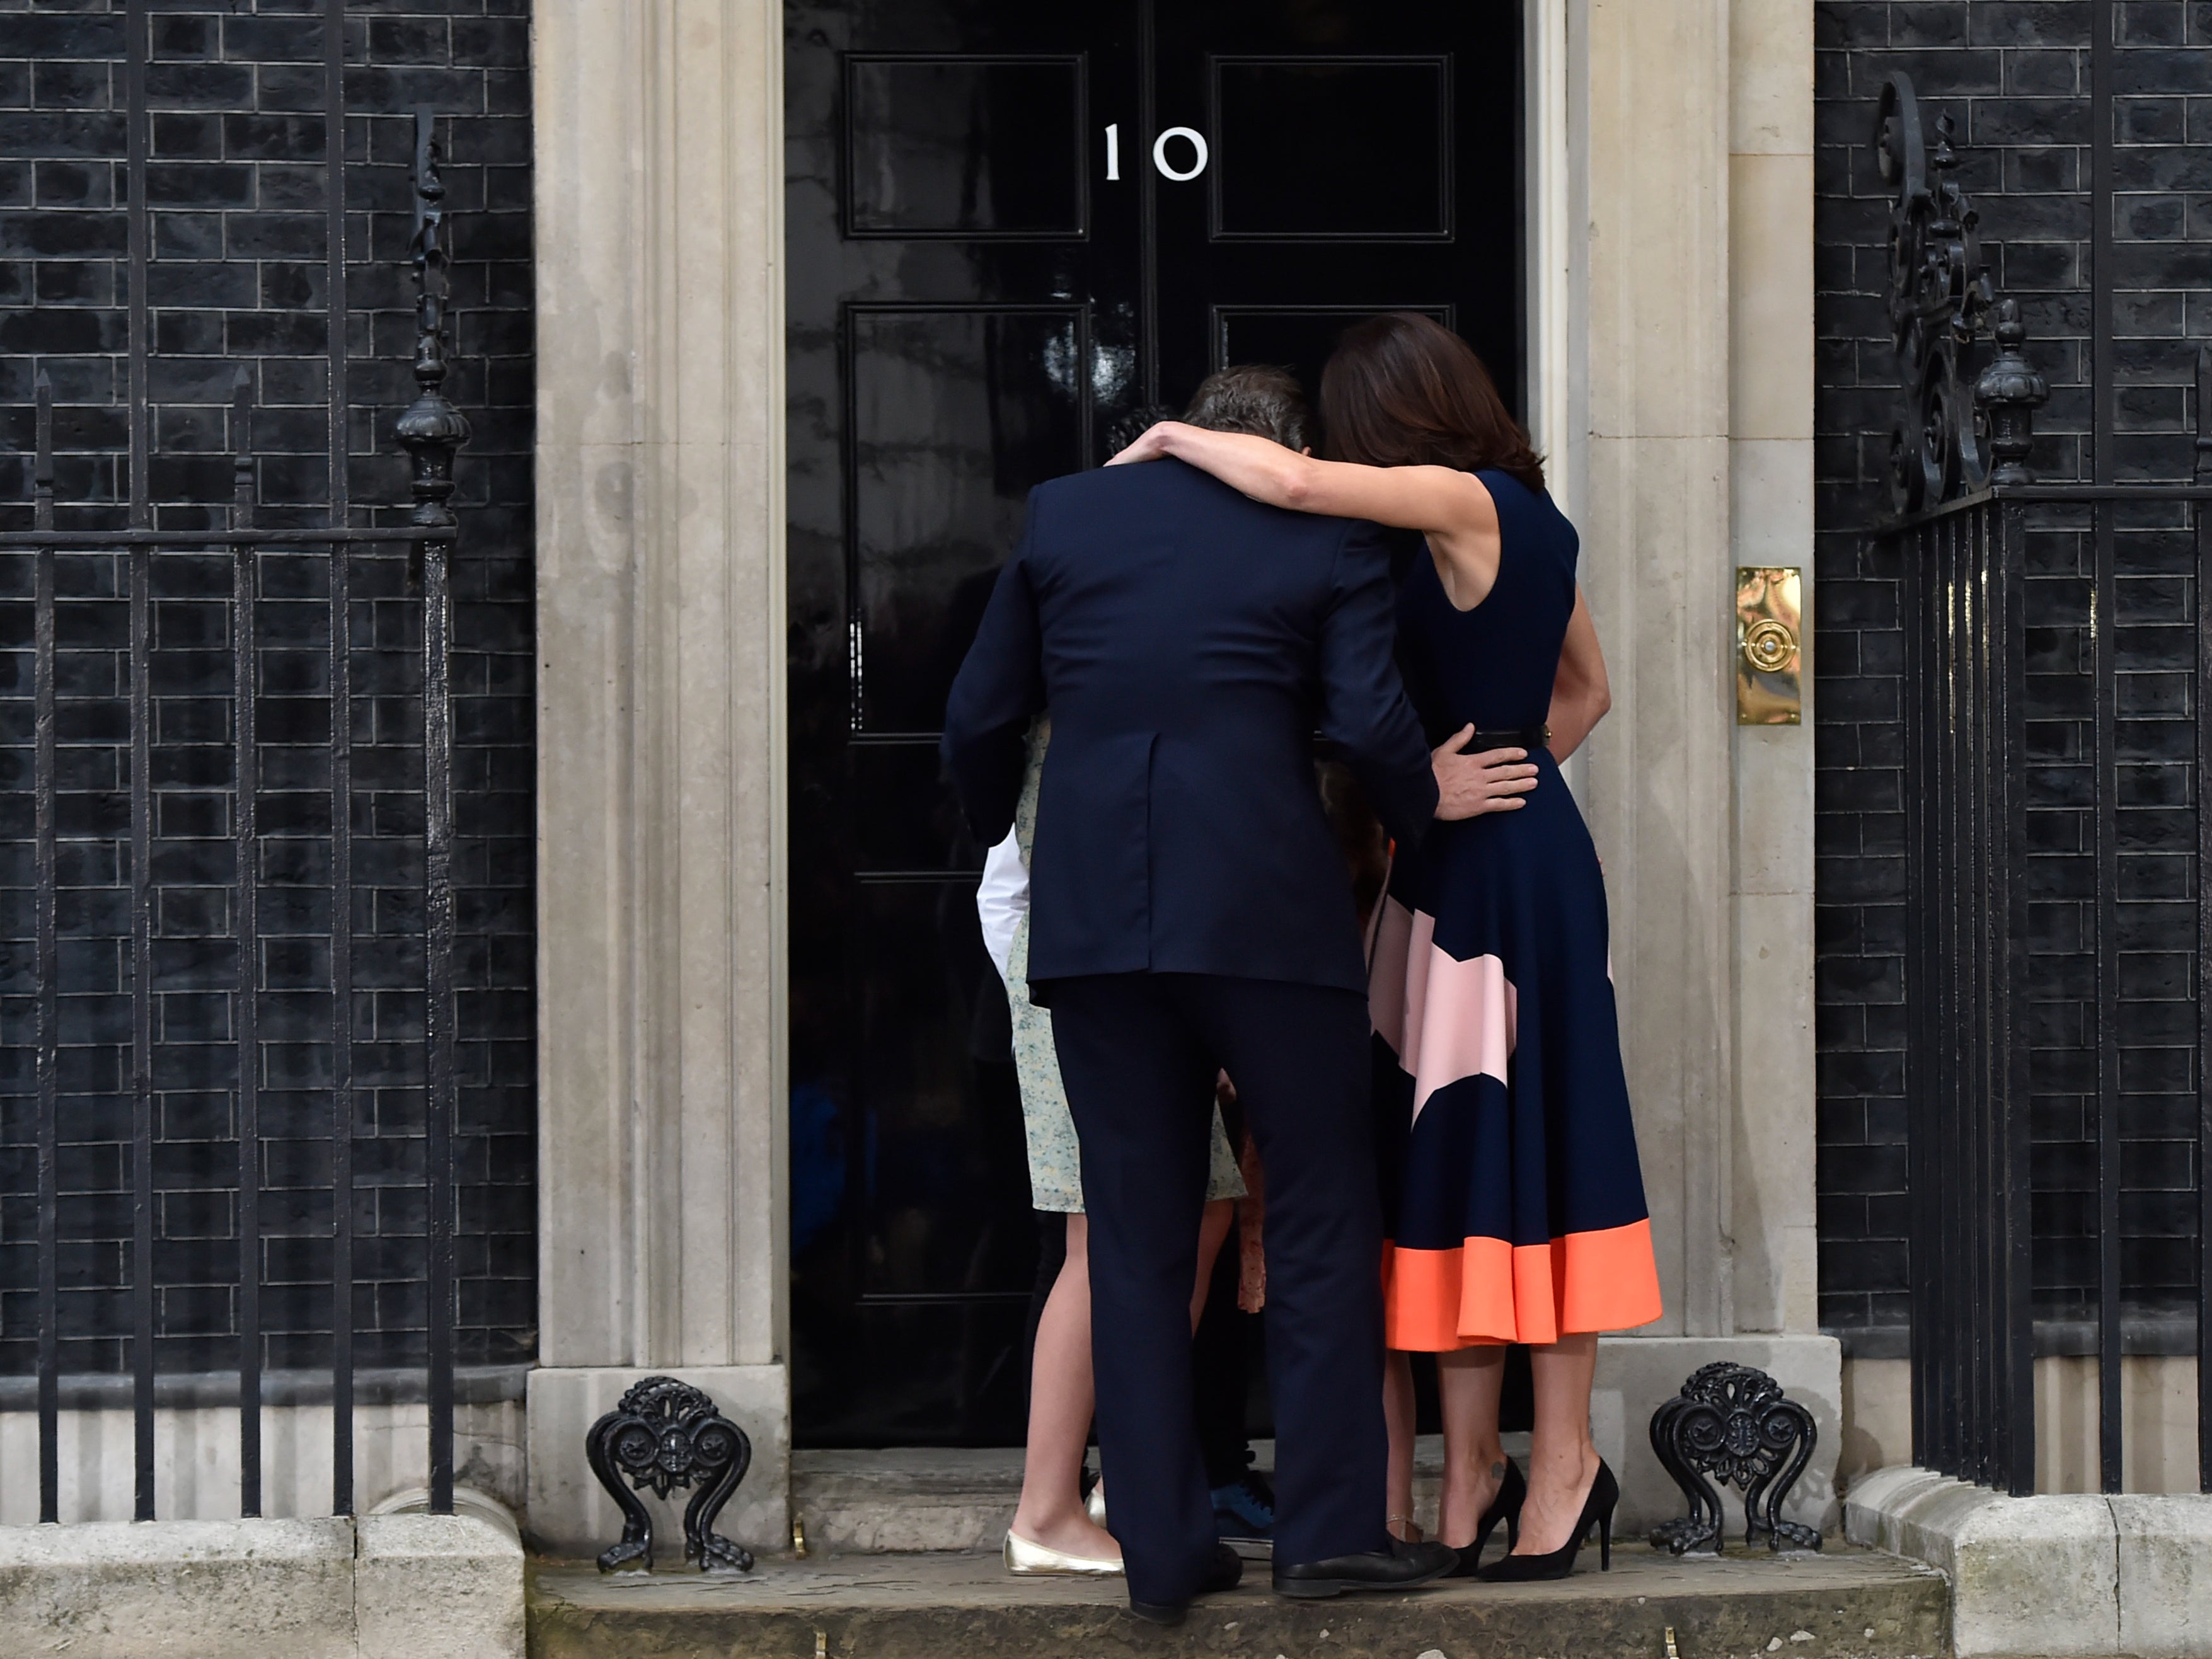 David Cameron with his family as he leaves No 10 in 2016